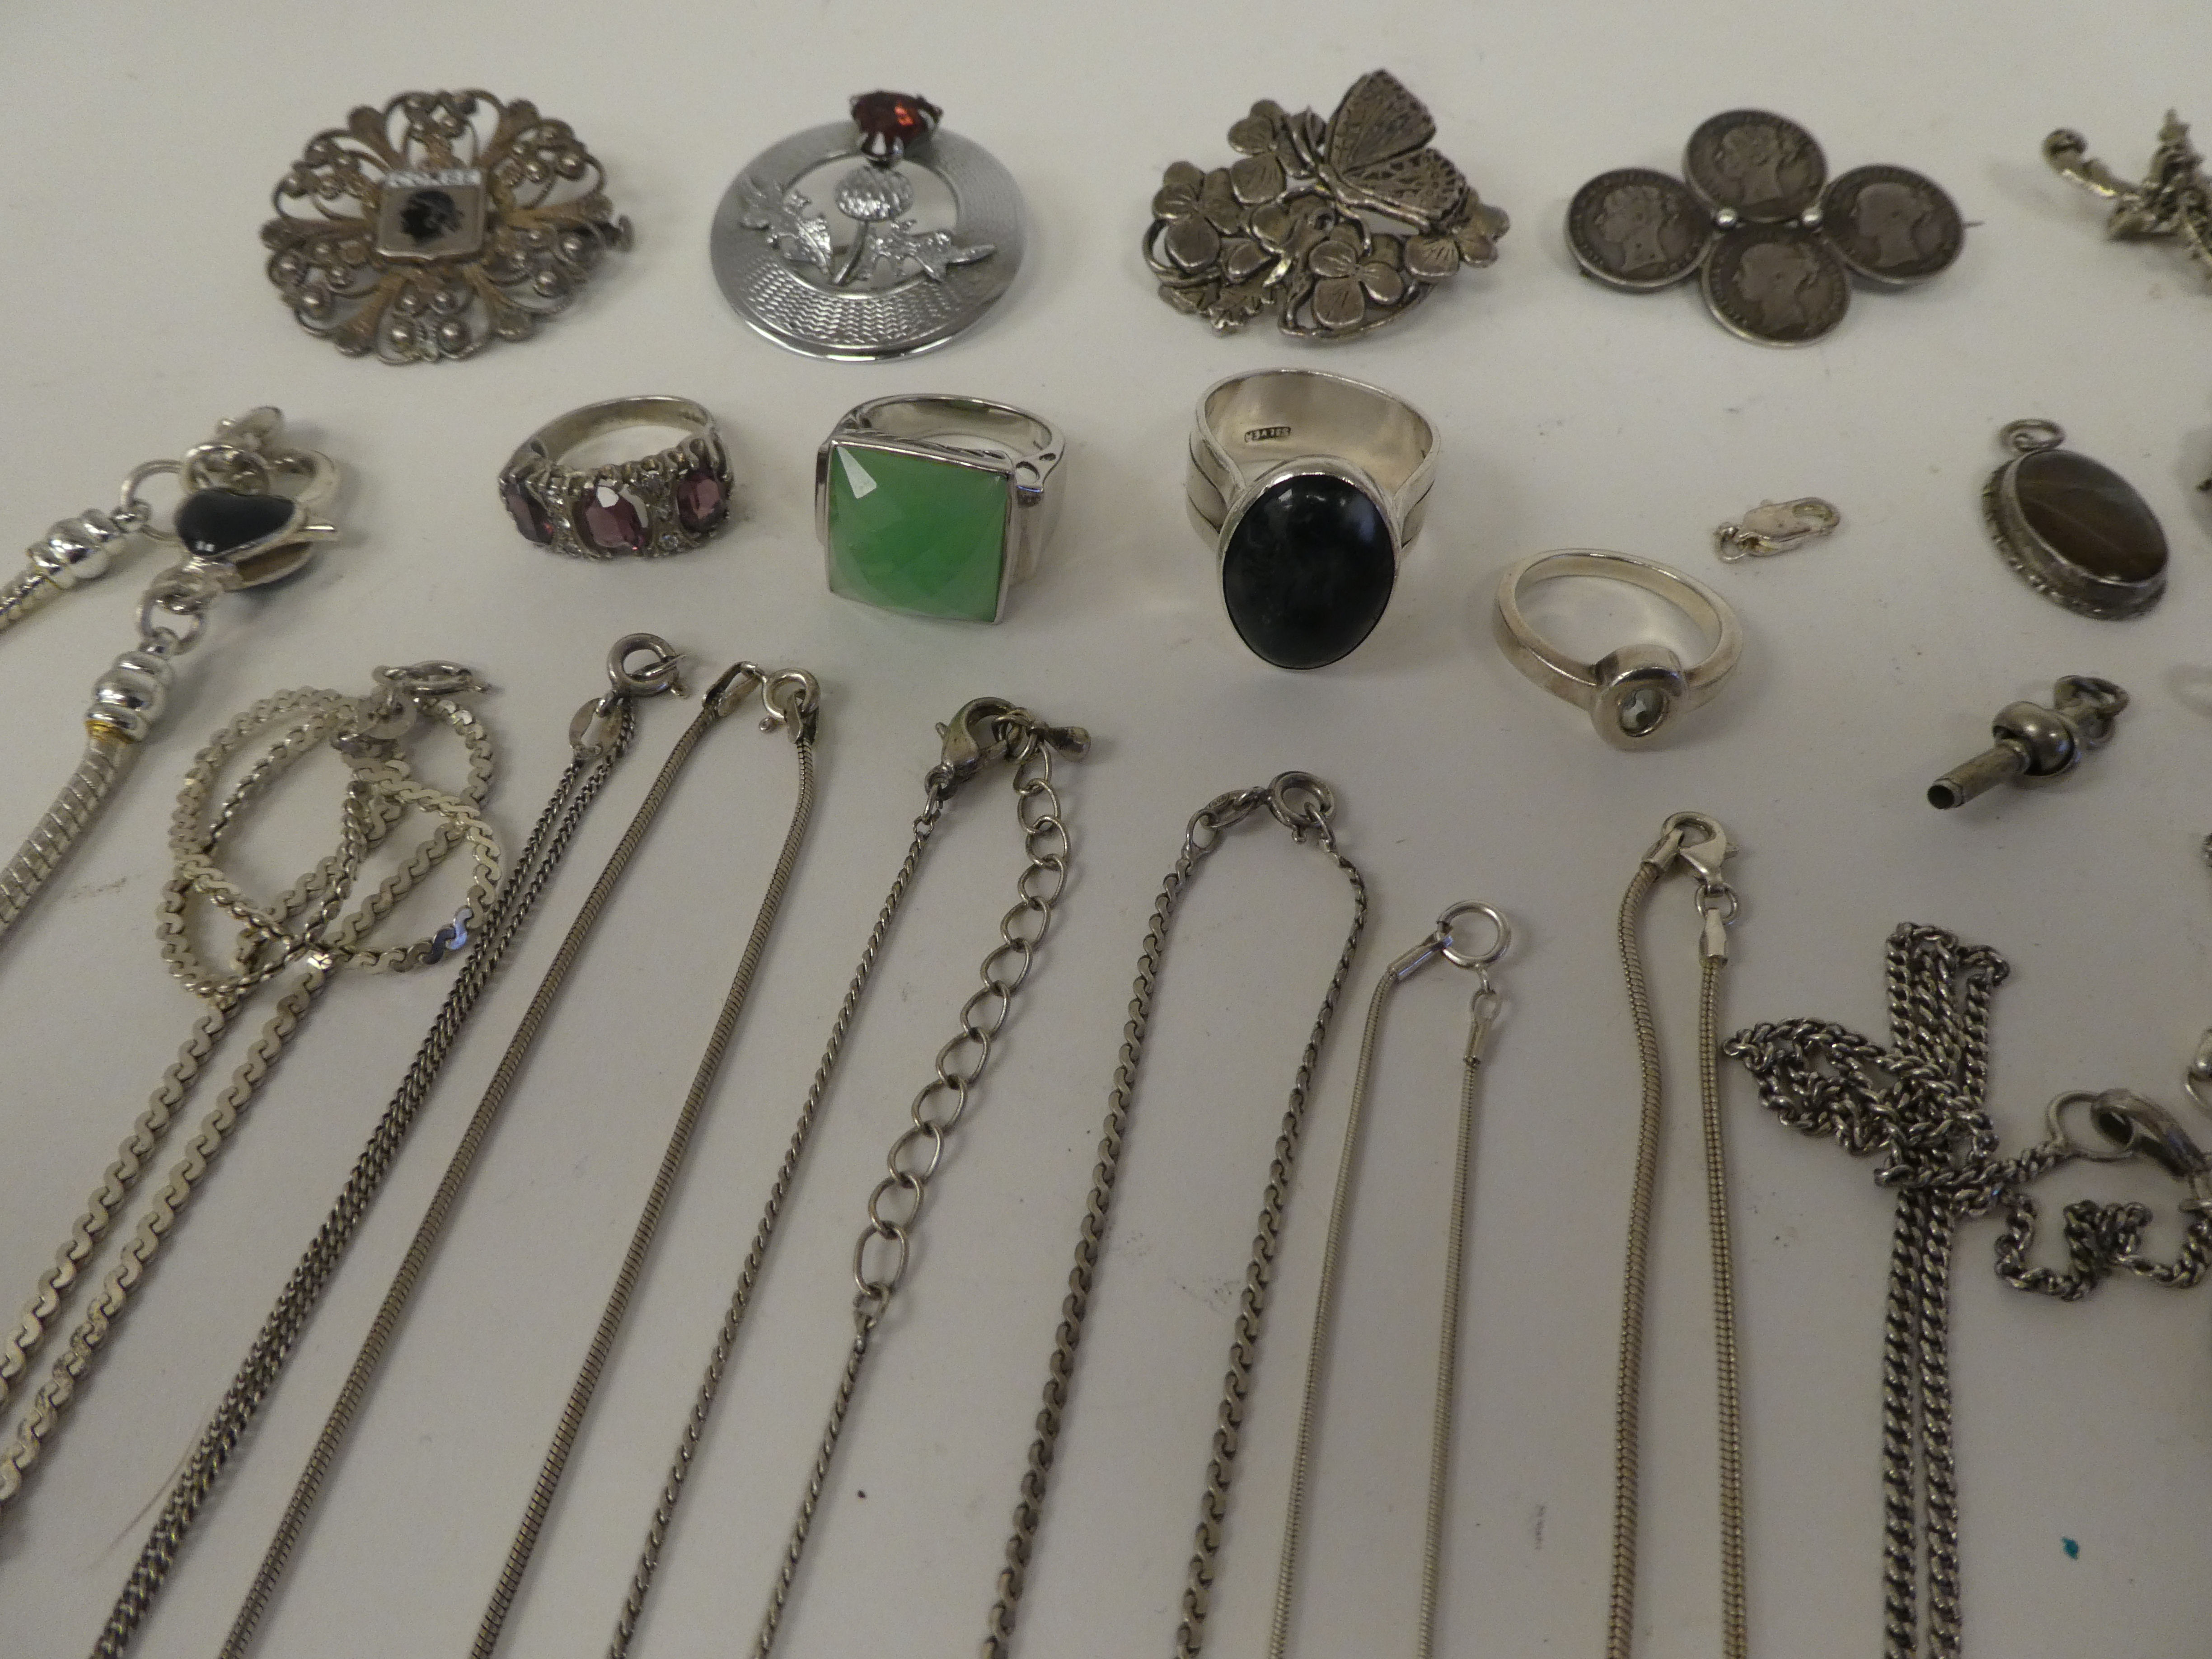 Silver, silver coloured metal and white metal items of personal ornament: to include pendants; - Image 2 of 8